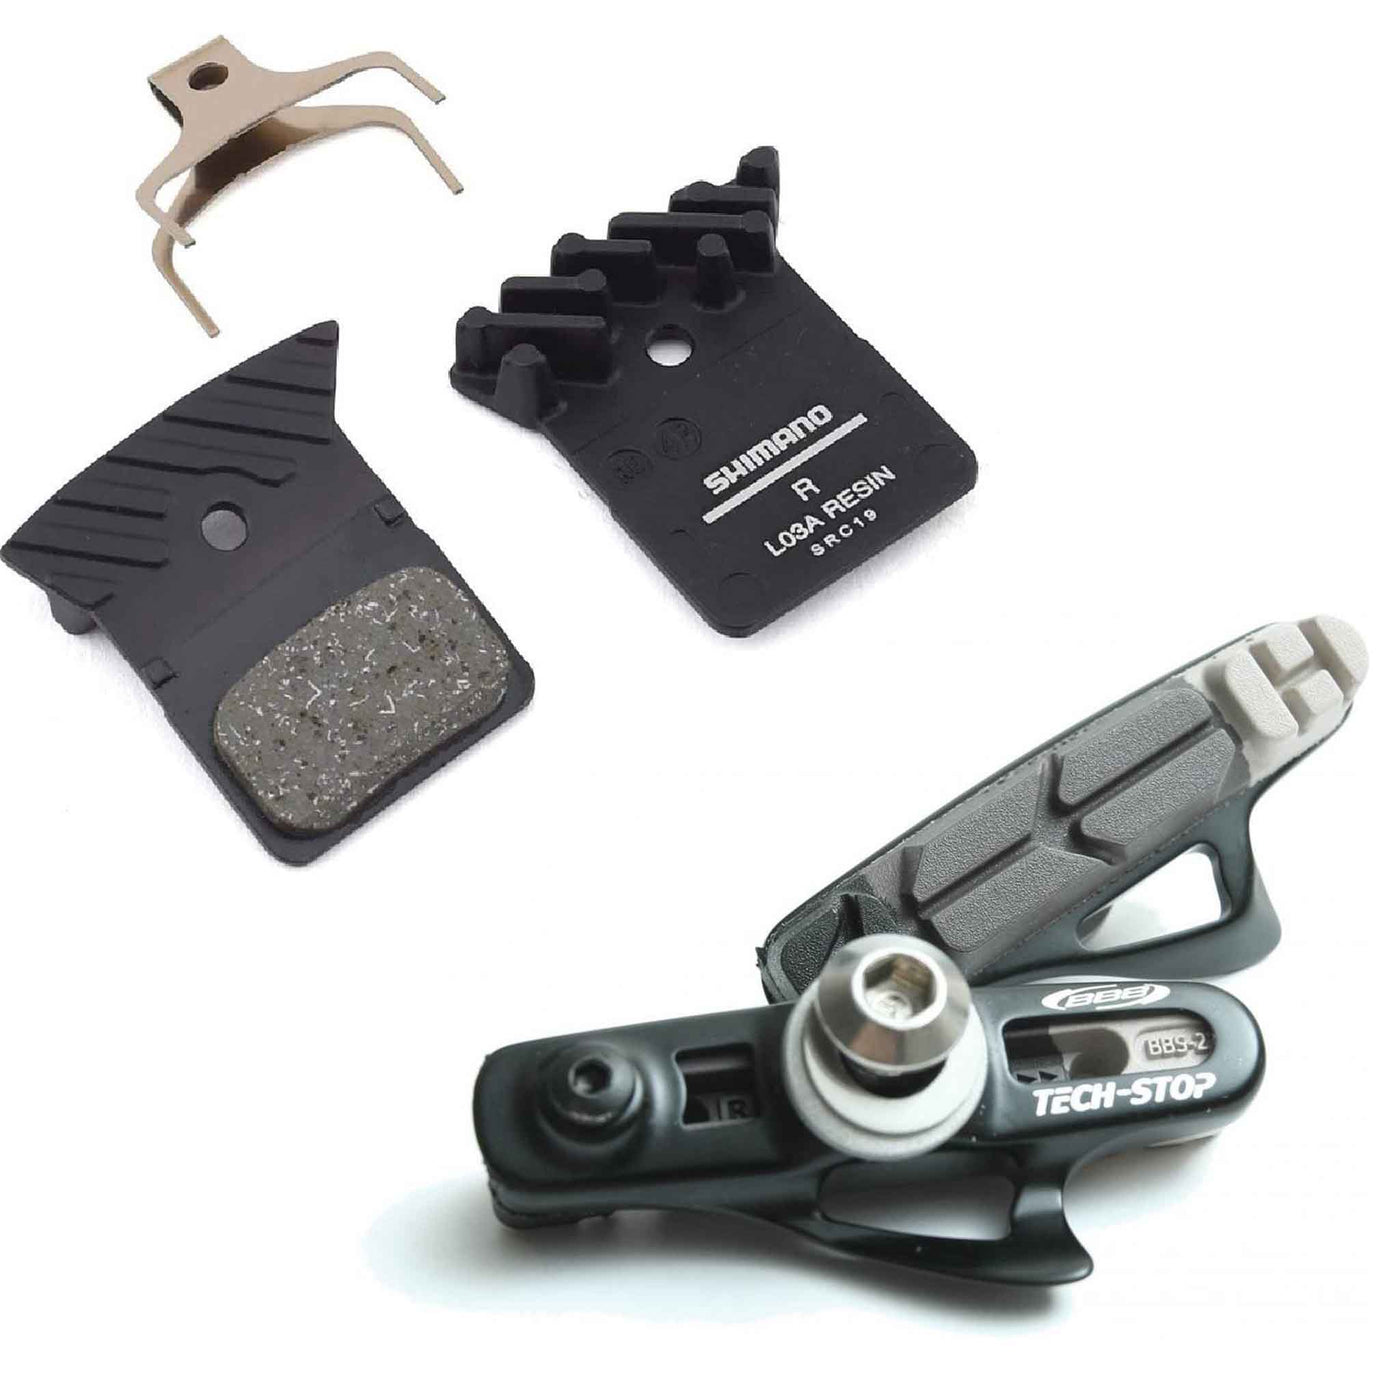 Brake pads for rim and disc road and gravel bikes from BBB Shimano Sram Campagnolo Swisstop BBB 